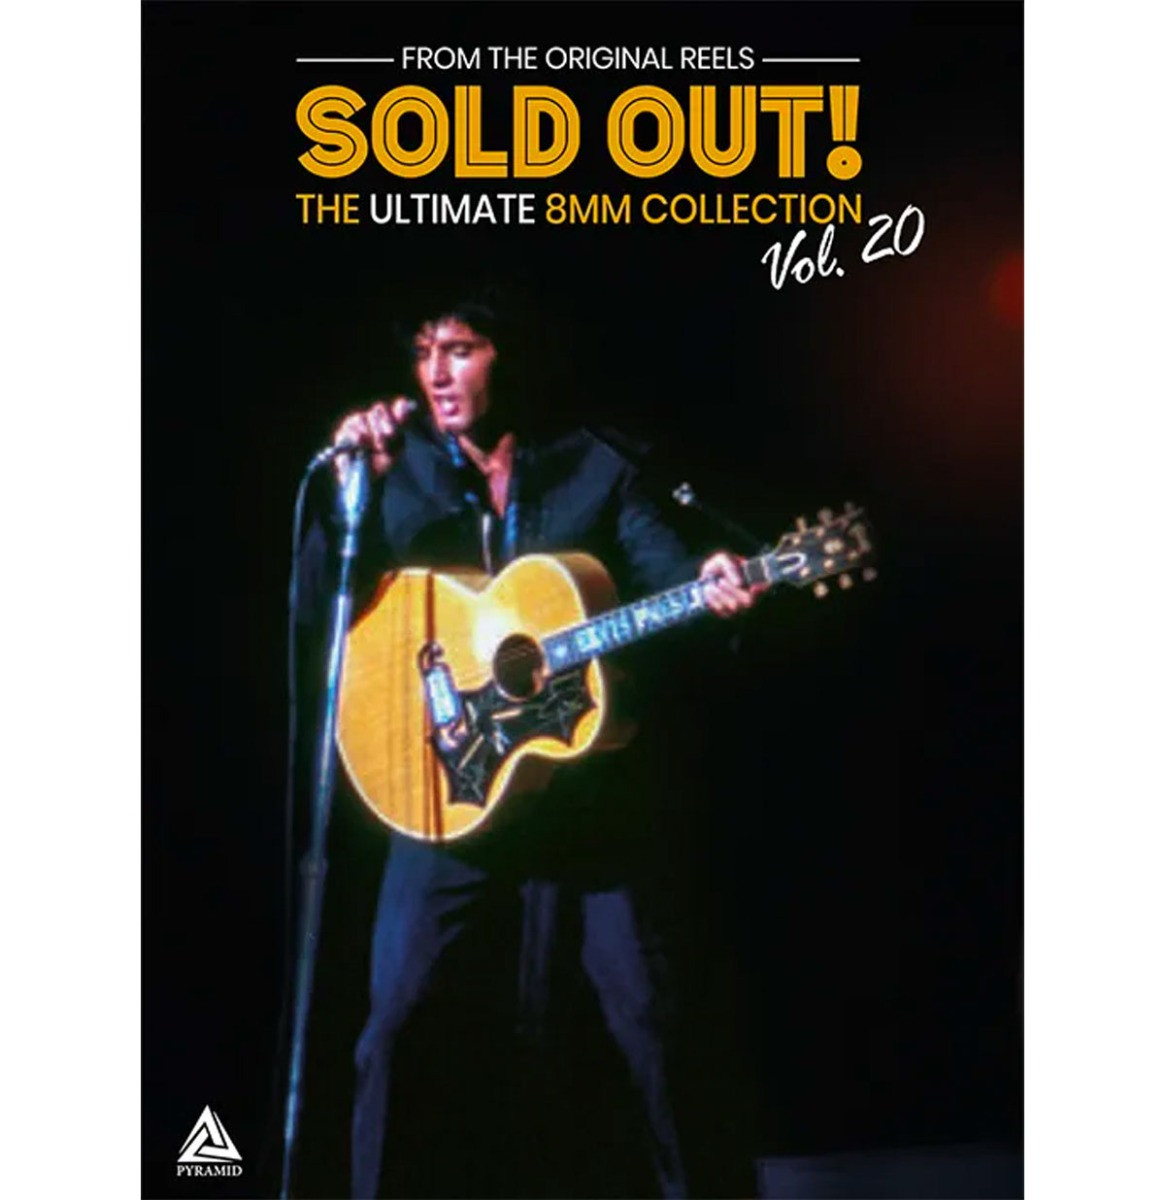 Elvis Presley: Sold Out! The Ultimate 8MM Collection Vol. 20 - 2 DVD Set